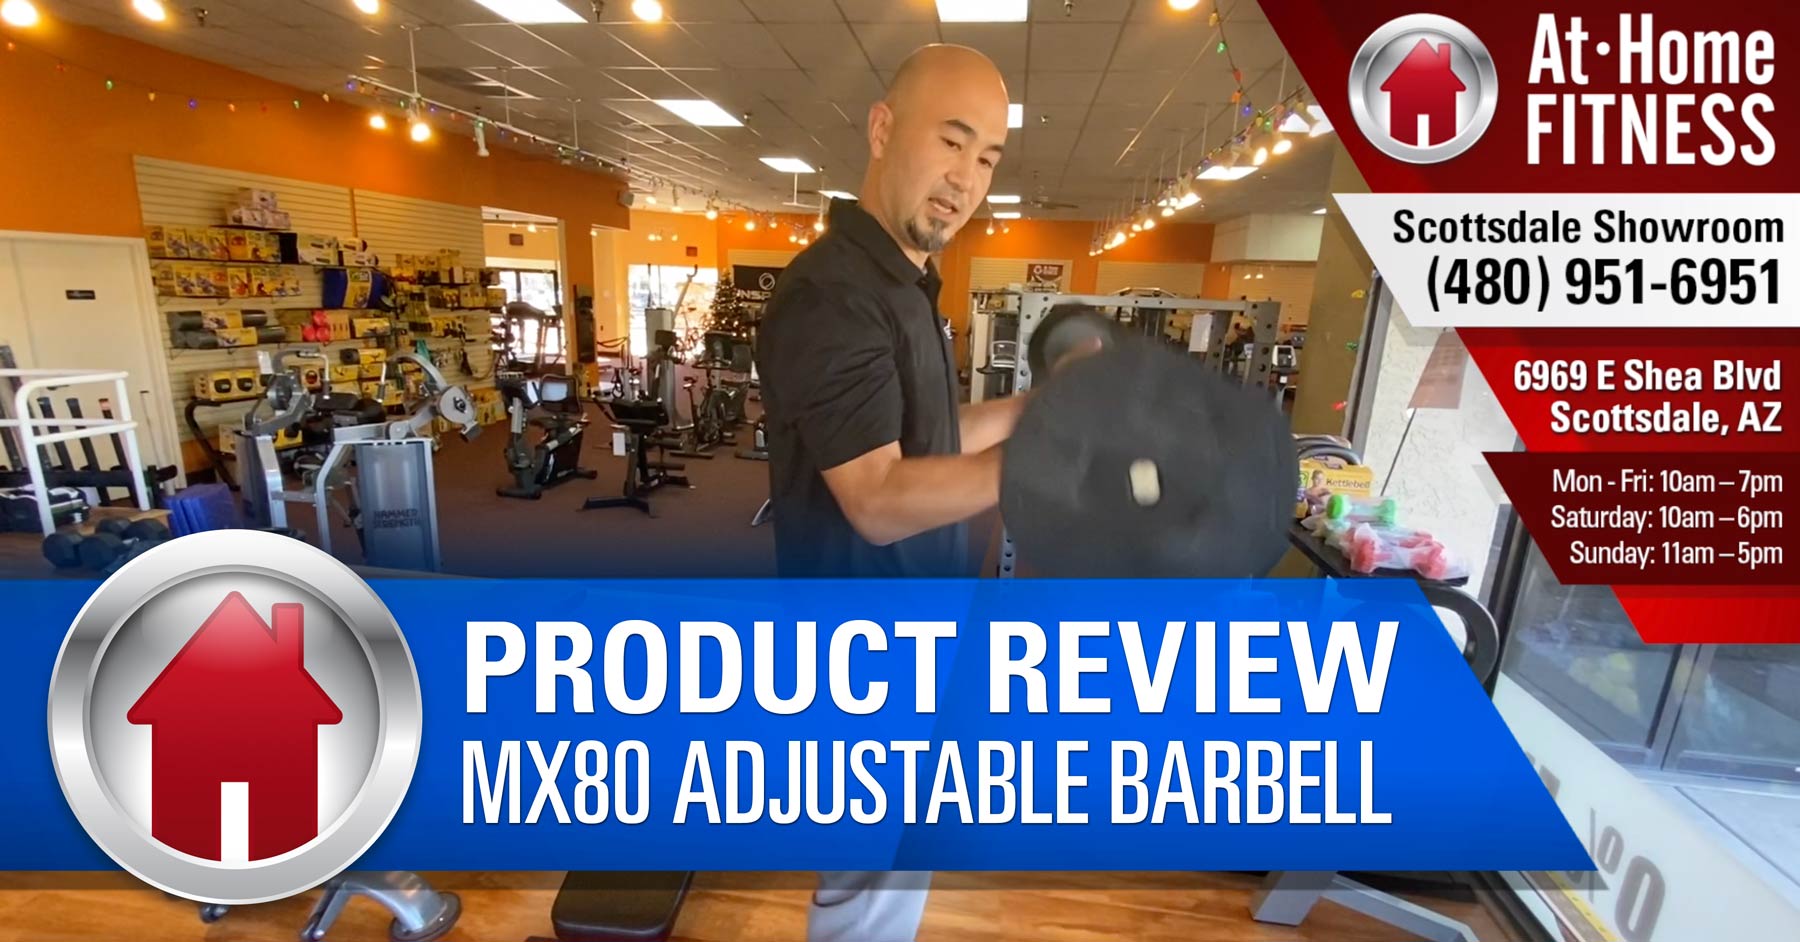 MX80 Adjustable Barbell - At Home Fitness Scottsdale